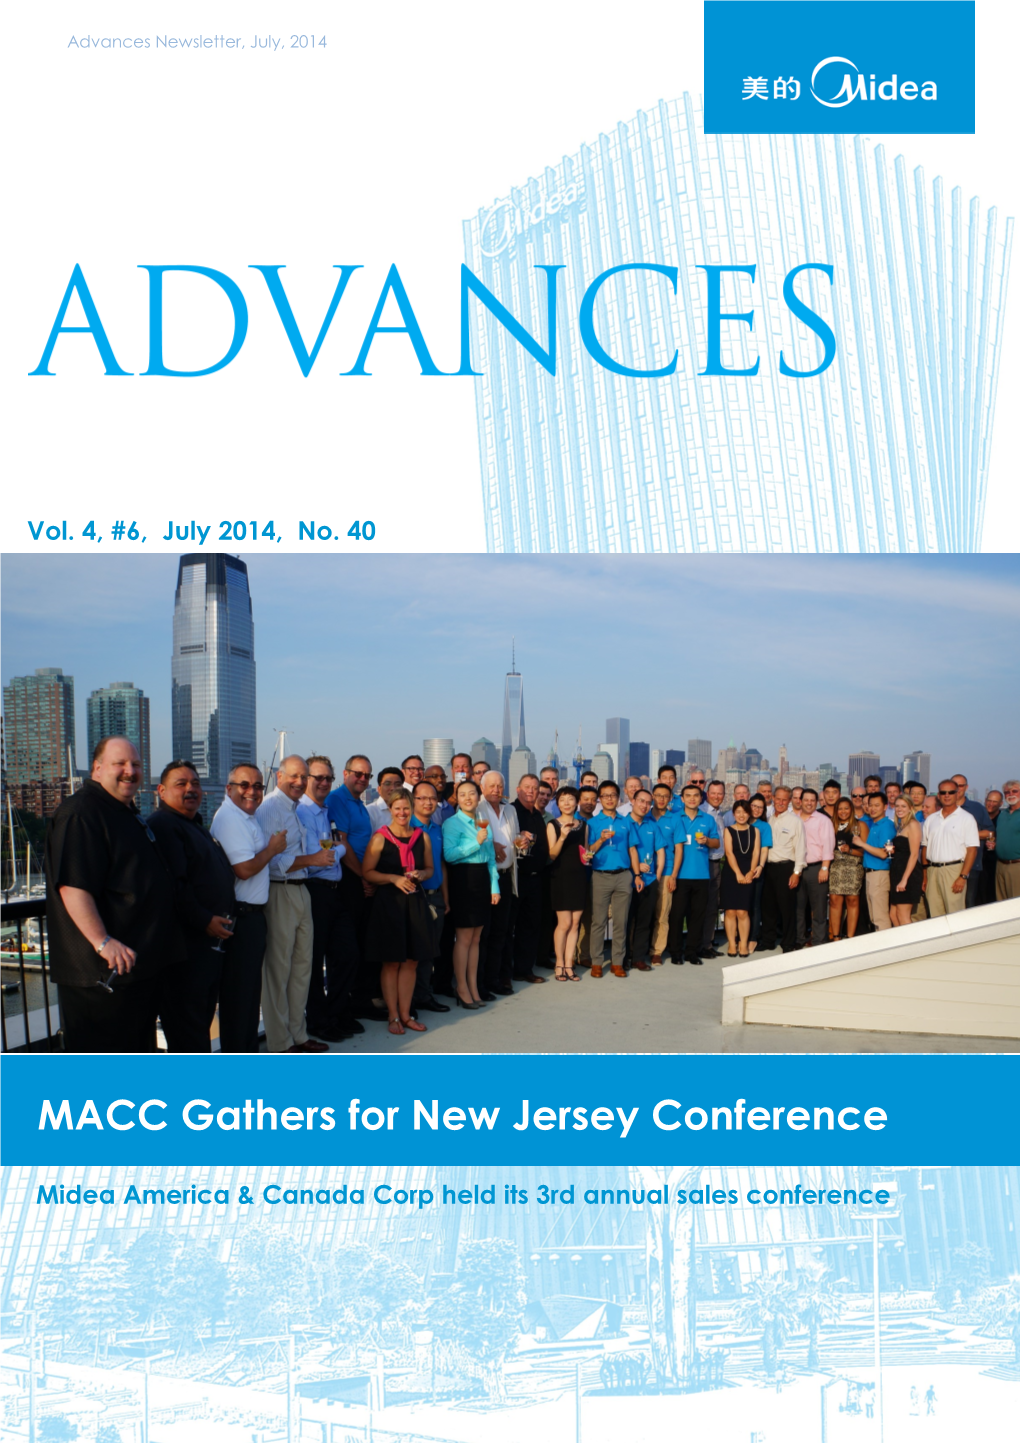 MACC Gathers for New Jersey Conference